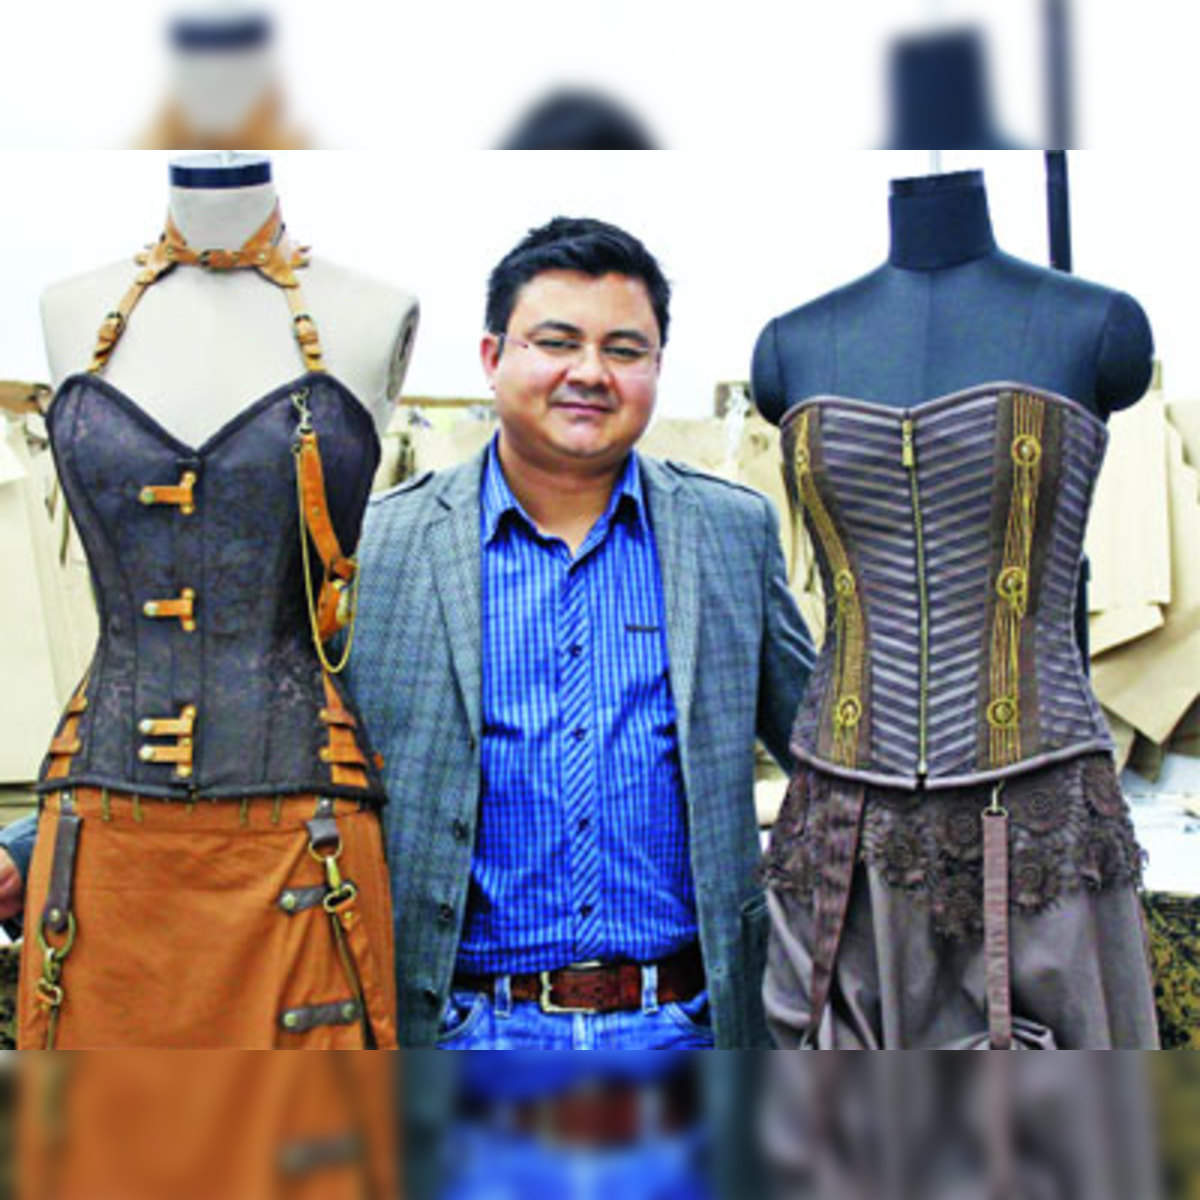 Steampunk Clothing China Trade,Buy China Direct From Steampunk Clothing  Factories at